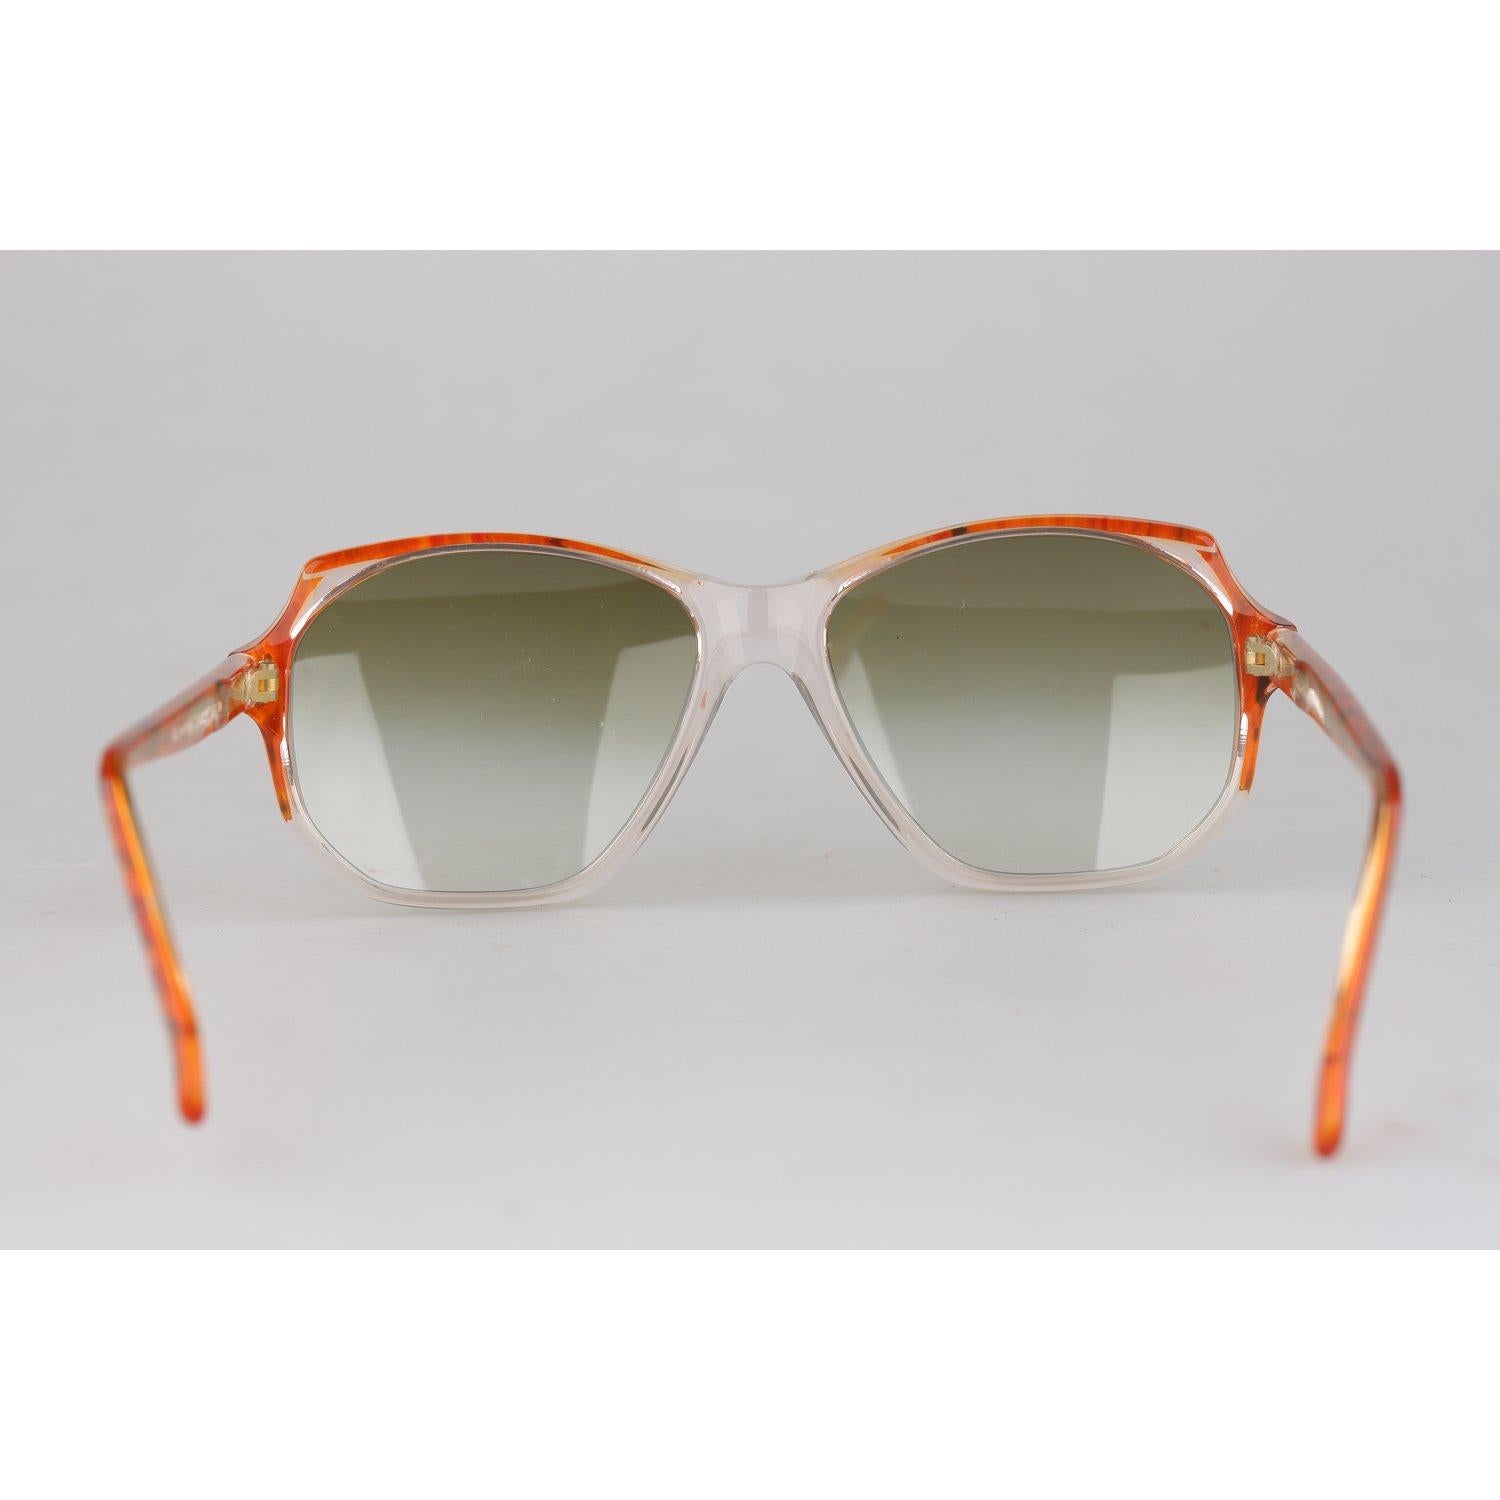 Yves Saint Laurent Vintage Sunglasses mod Salamine 54mm New Old Stock In Excellent Condition In Rome, Rome